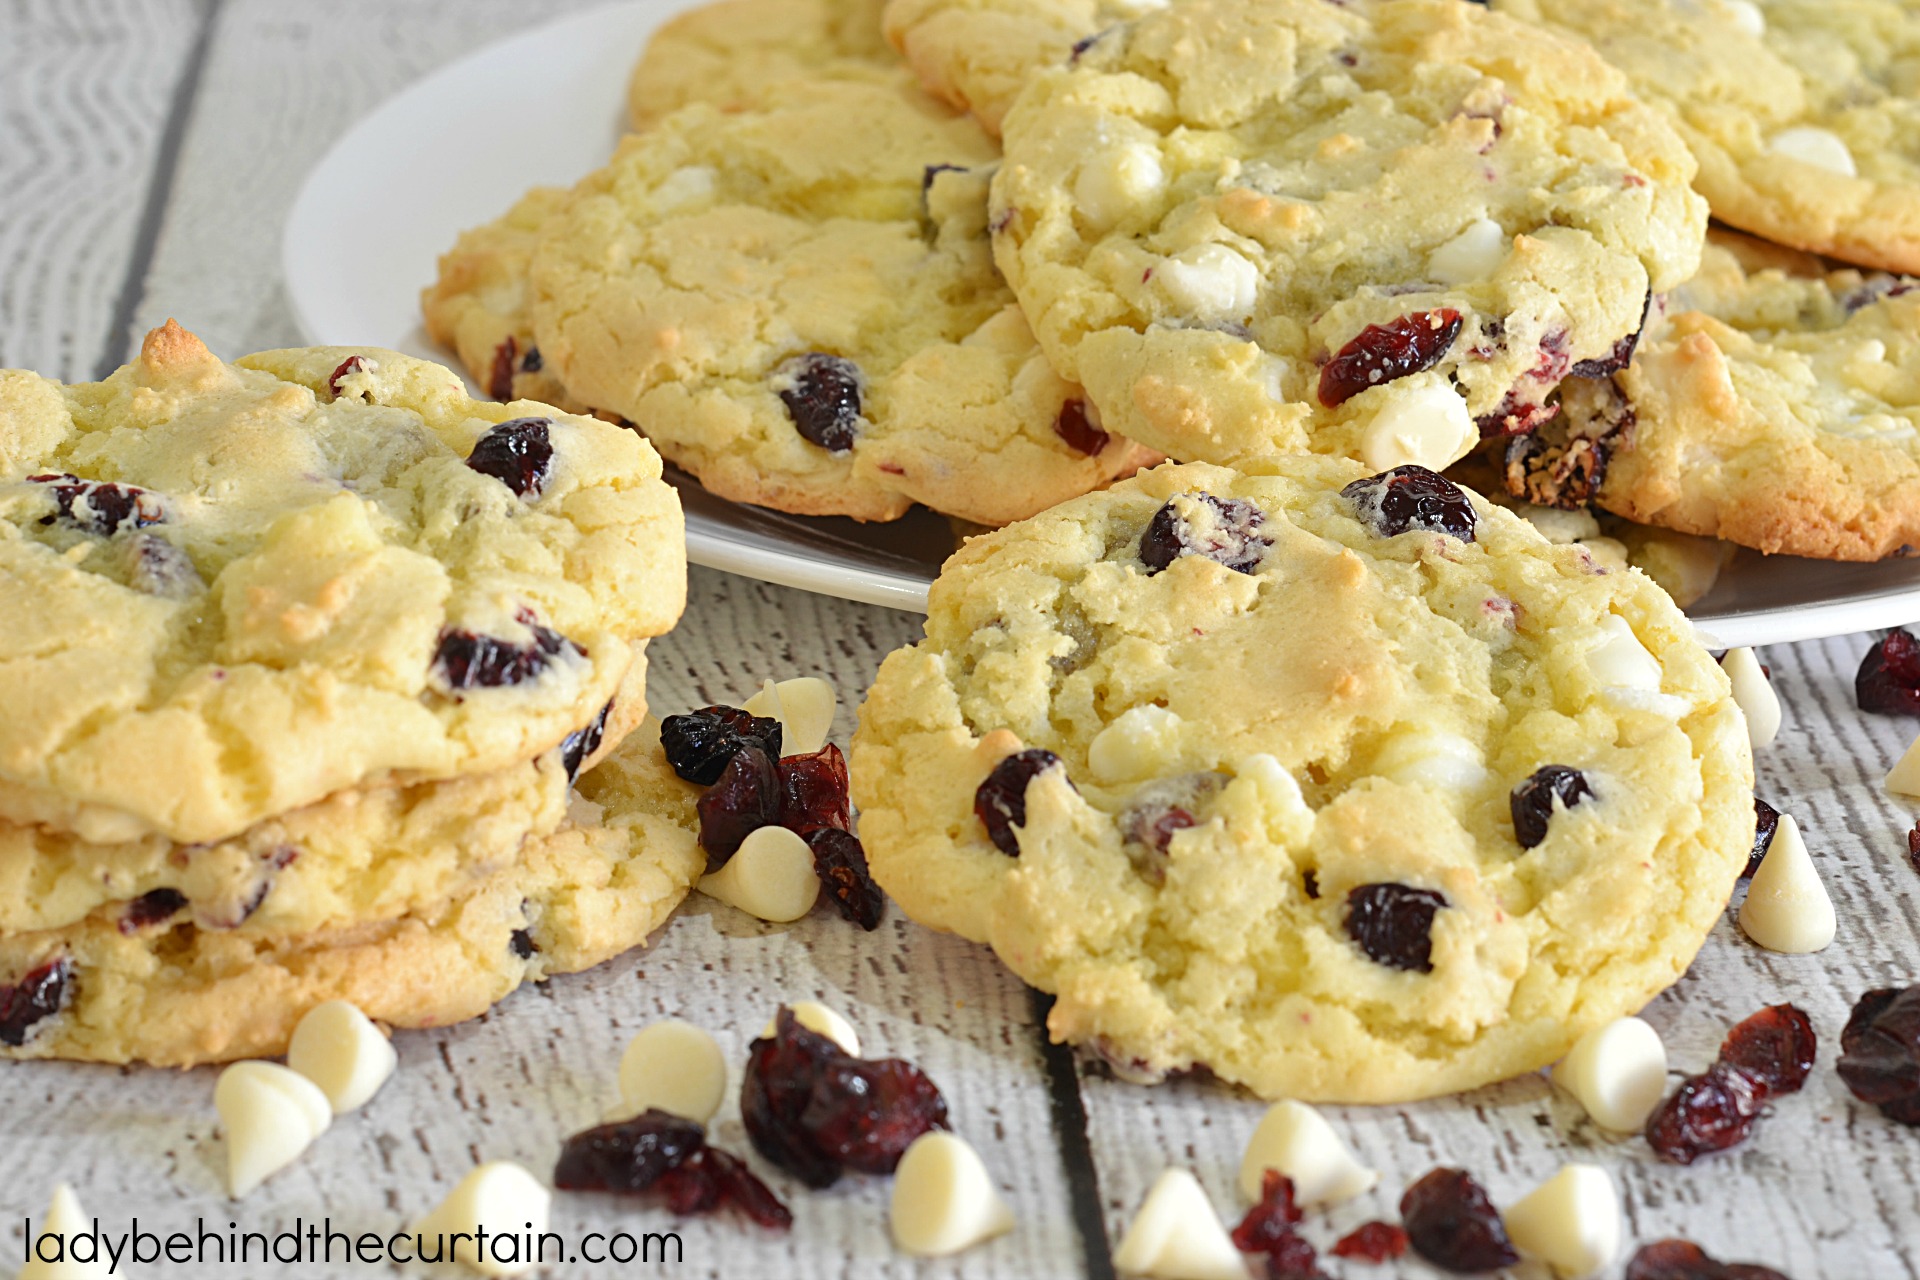 What is an easy cake mix cookie recipe?